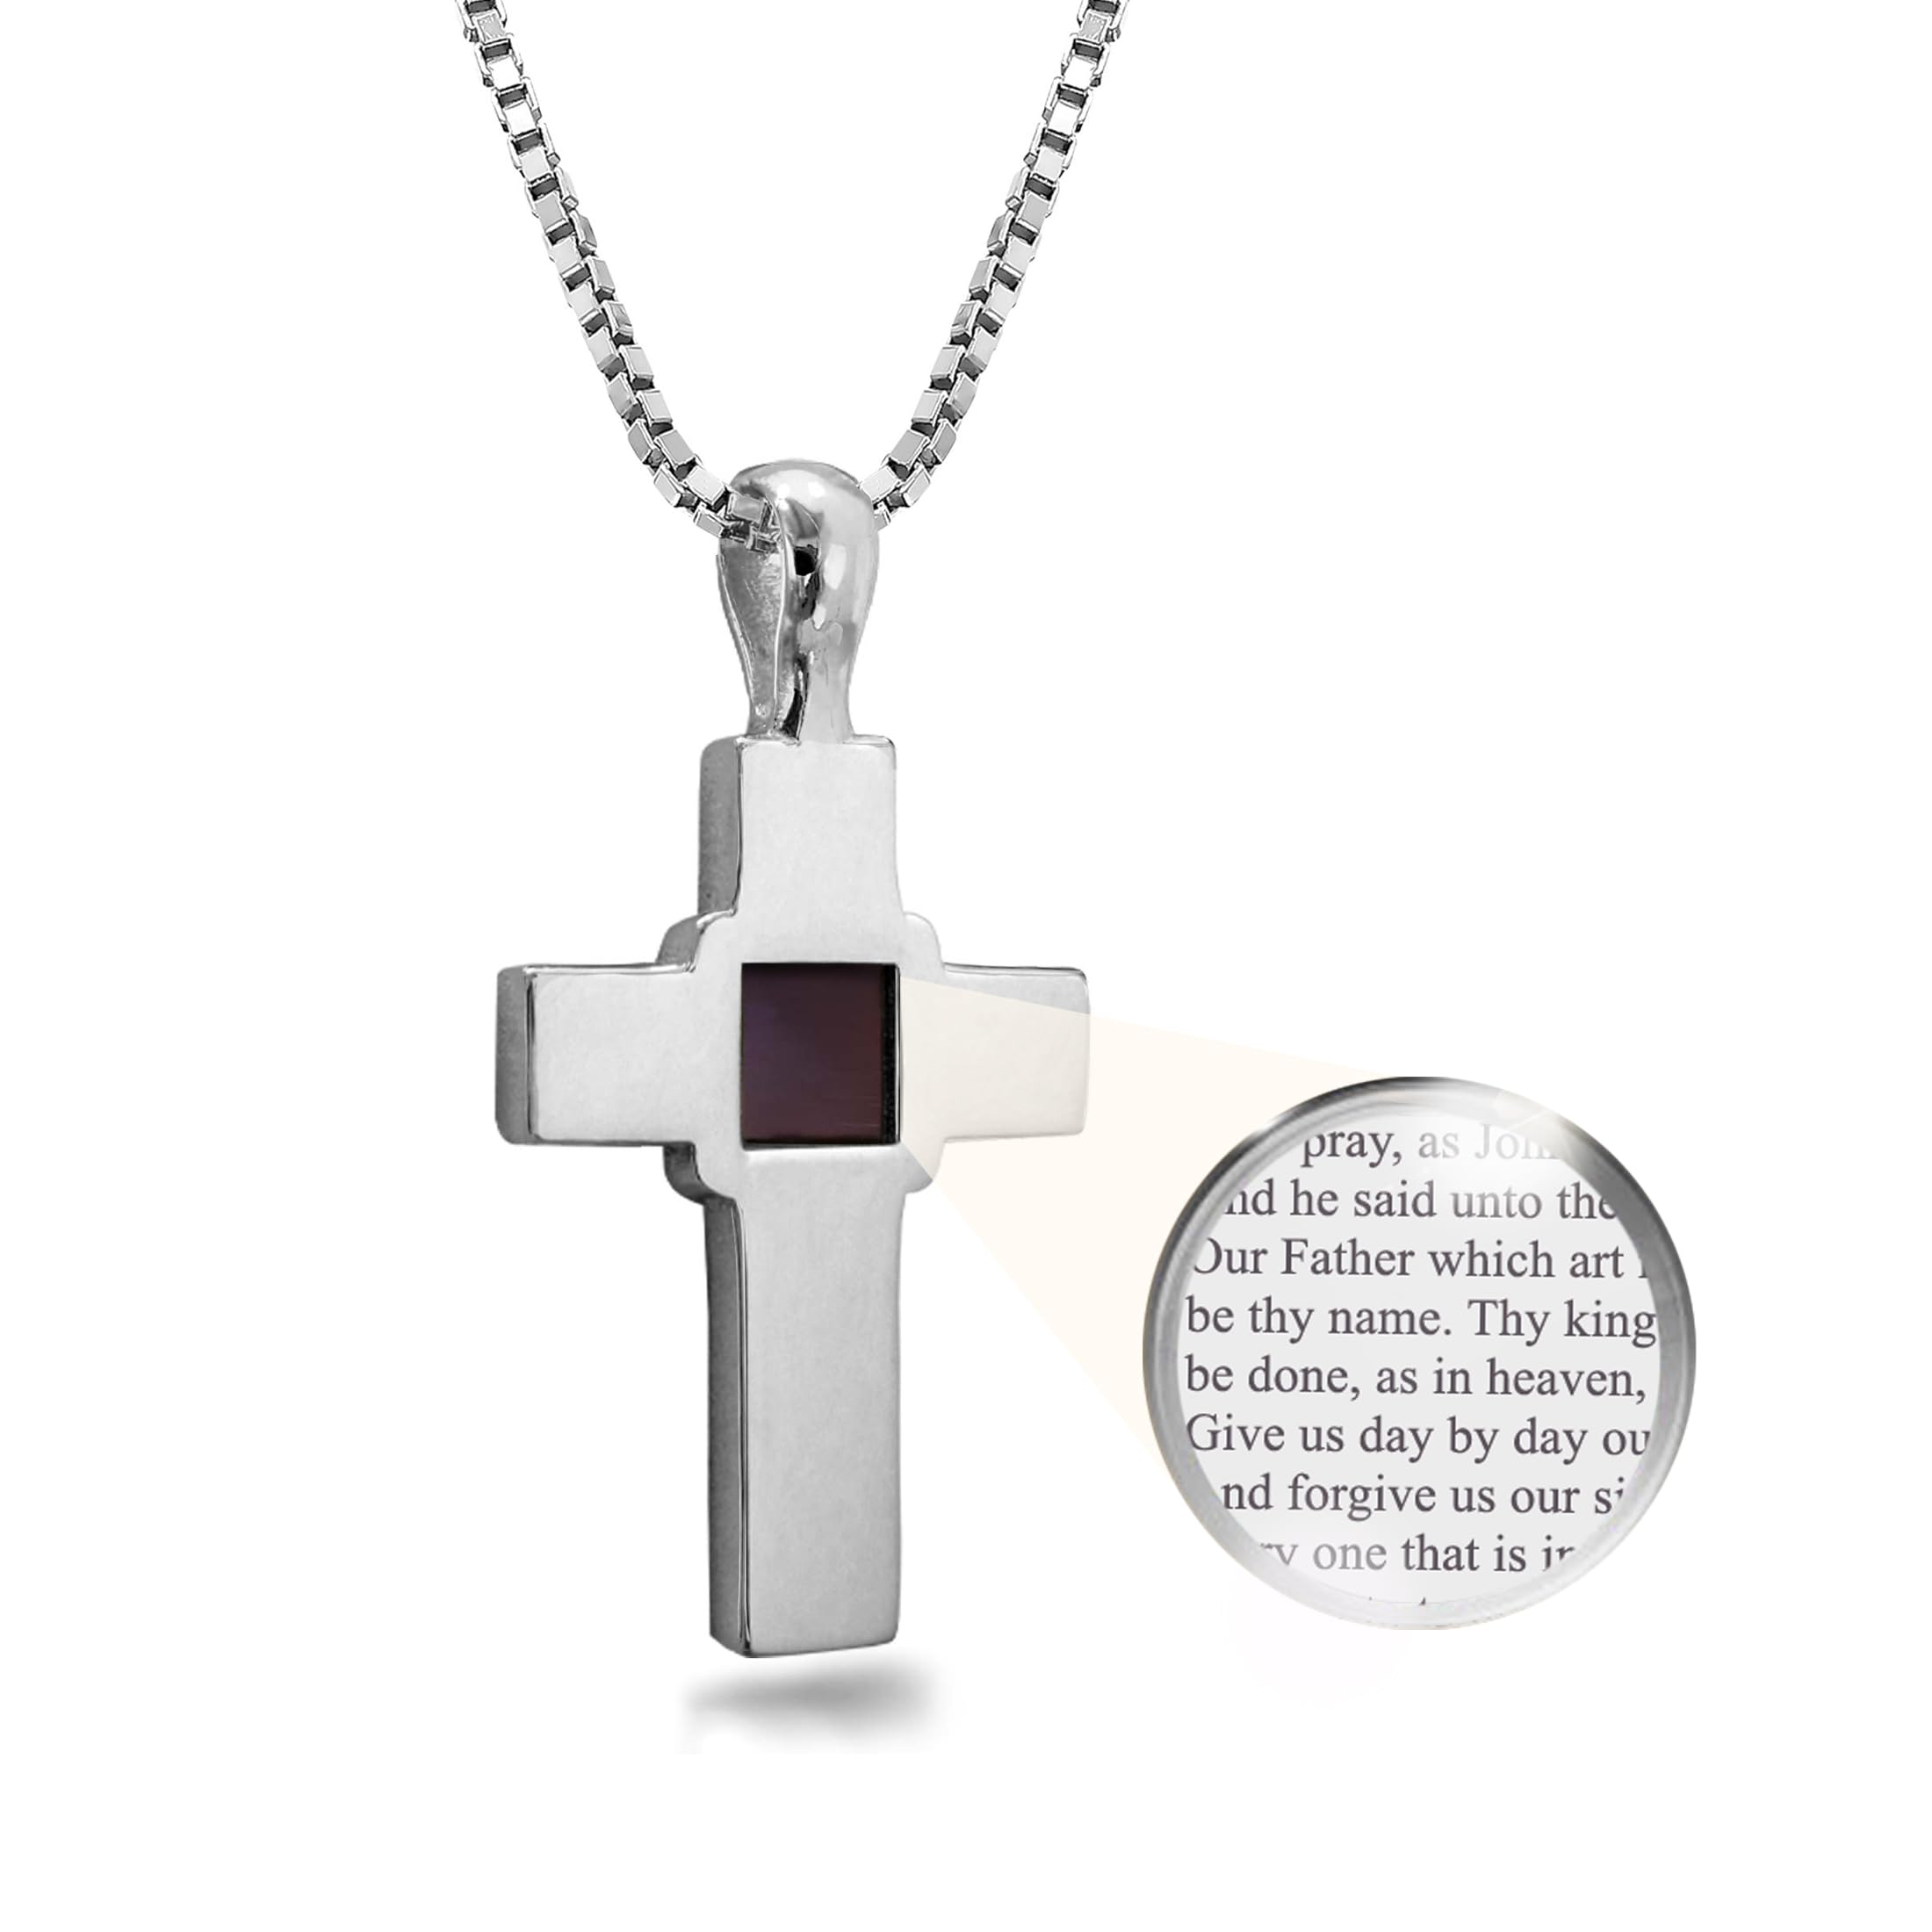 Cross Necklace with Smallest Nano Bible on Jewelry - Christian Pendant for Men or Women with Entire KJV New Testament Holy Scriptures on 0.2